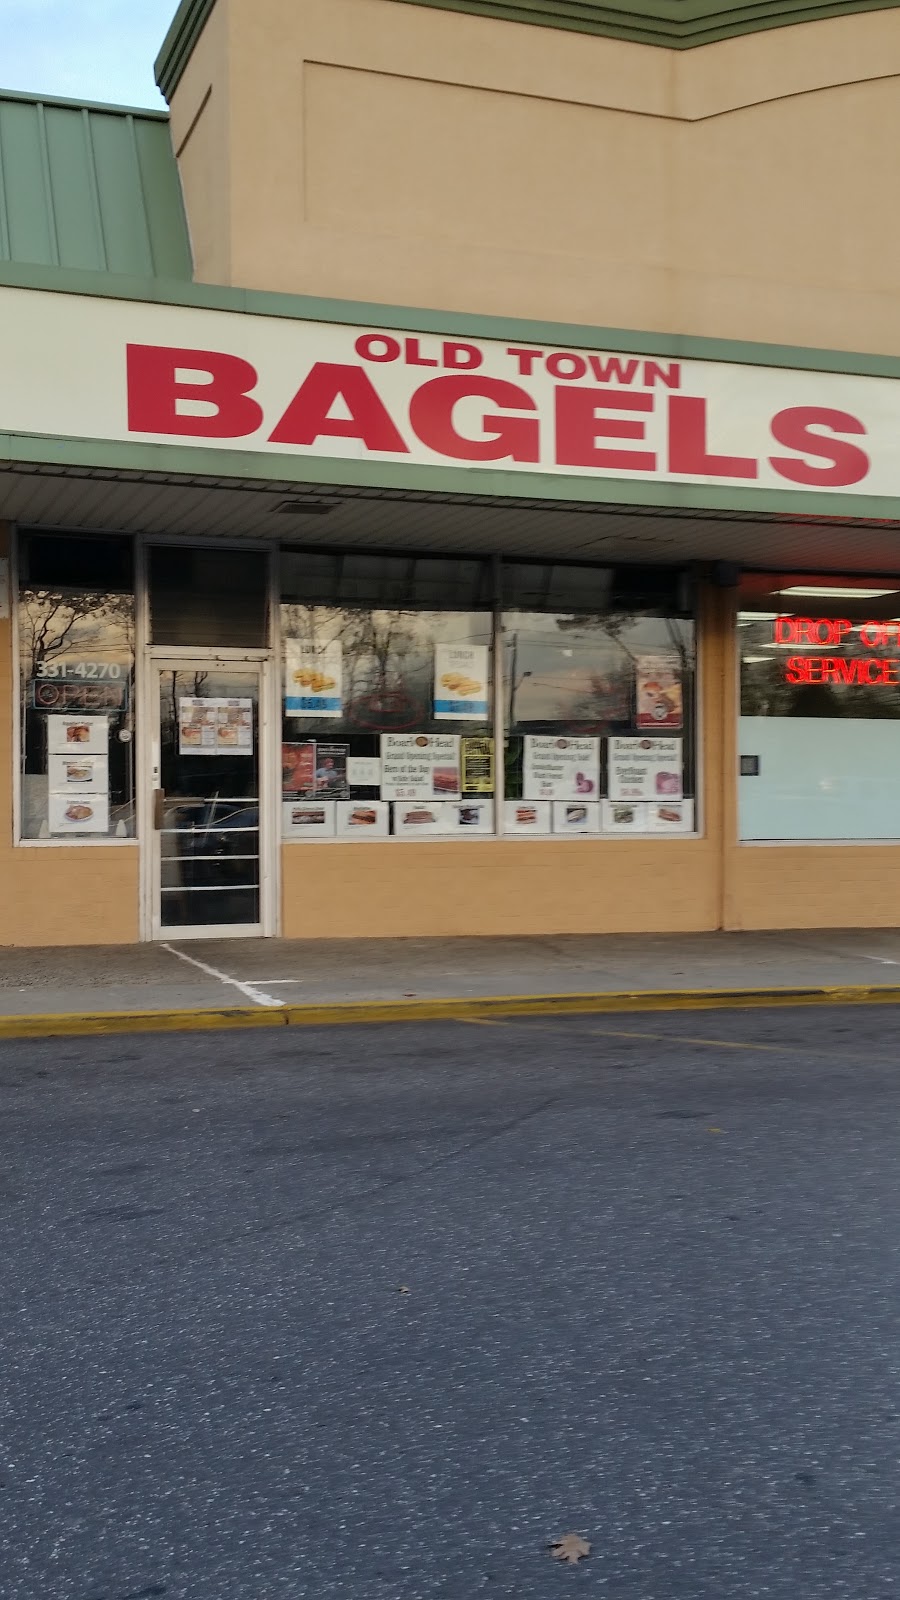 Old Town Bagels | Old Town Rd, Port Jefferson Station, NY 11776 | Phone: (631) 331-4270